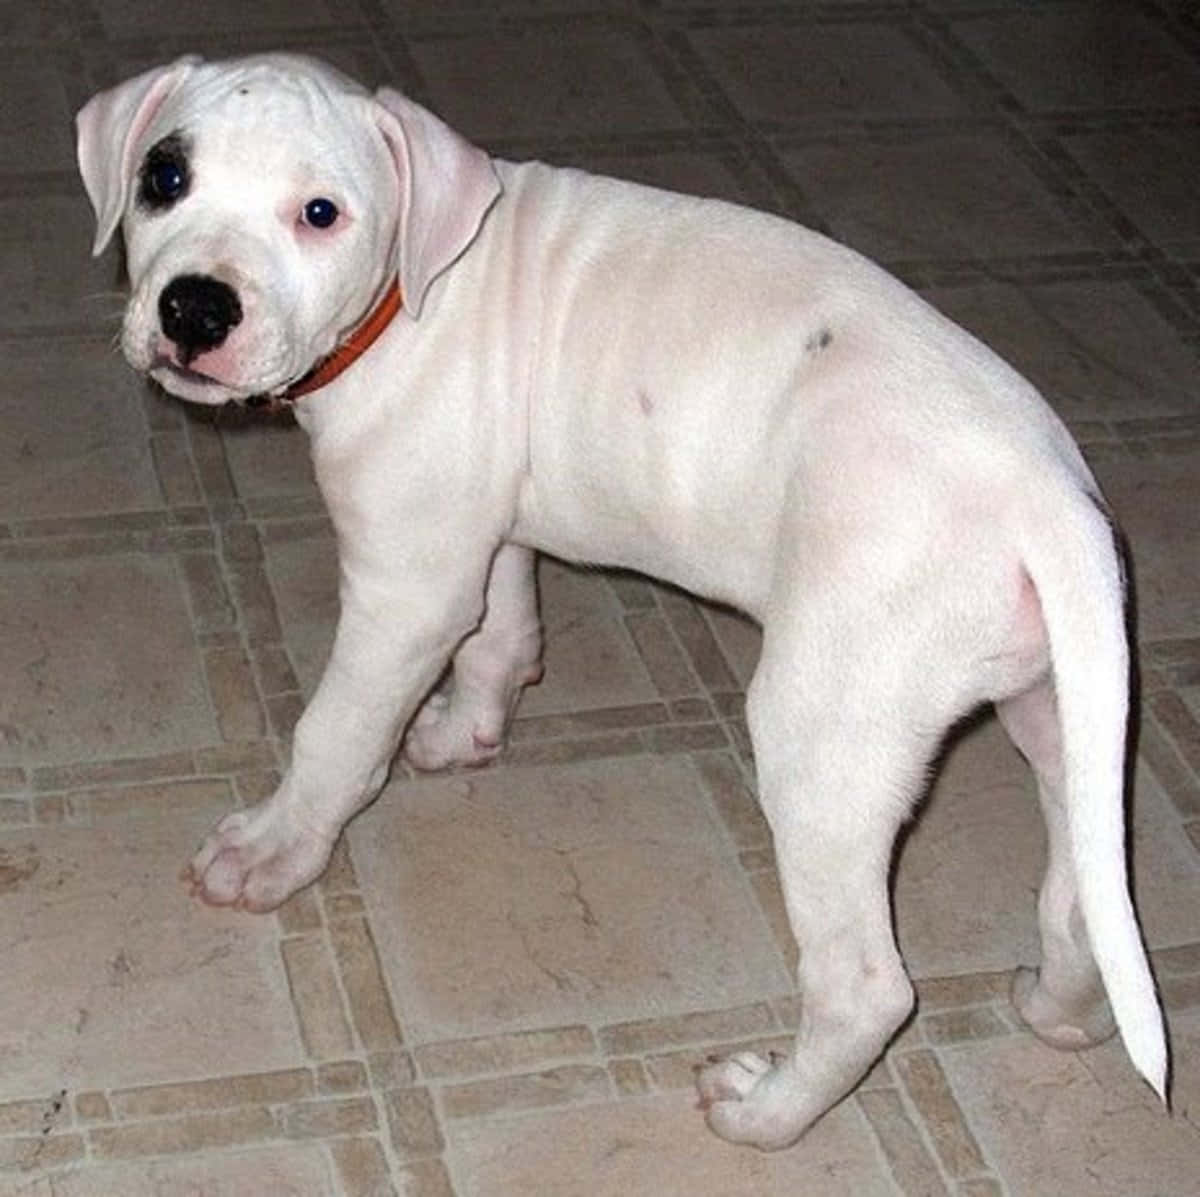 A White Puppy Standing On A Tiled Floor